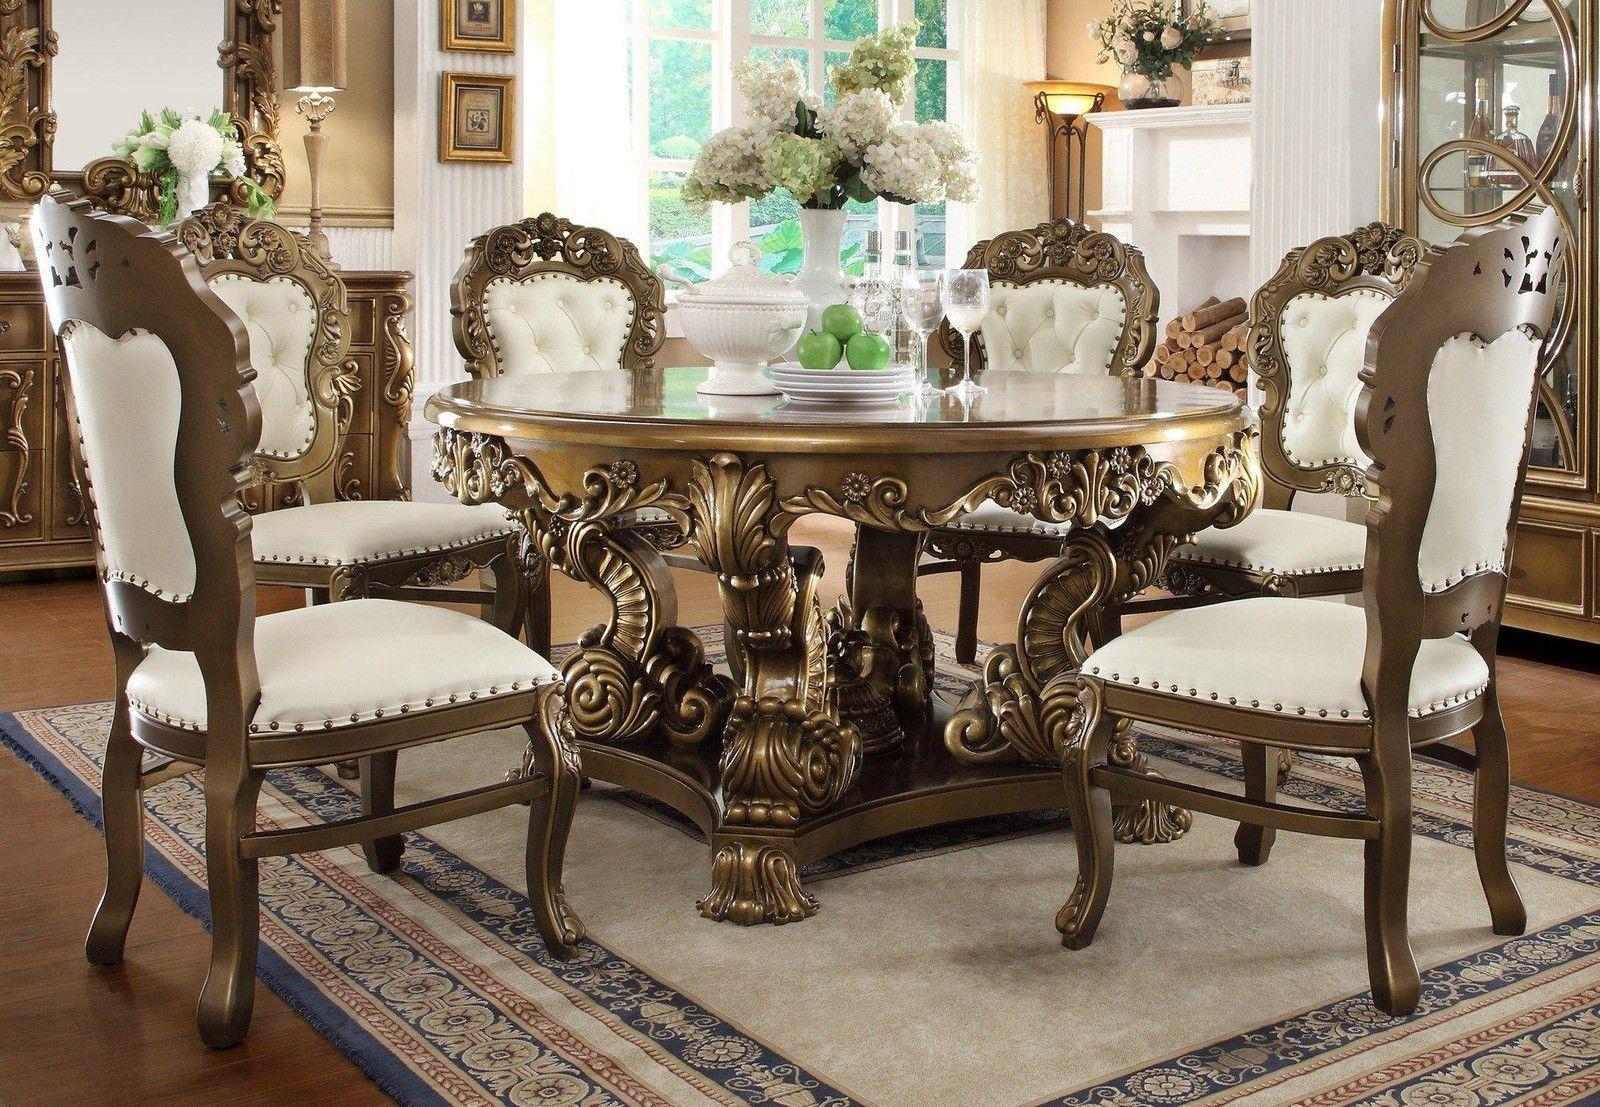 Traditional Dining Table Set HD-8008 – DINING TABLE SET HD-8008-RTSET7 in Antique Brown, Golden Brown, Ivory Leatherette